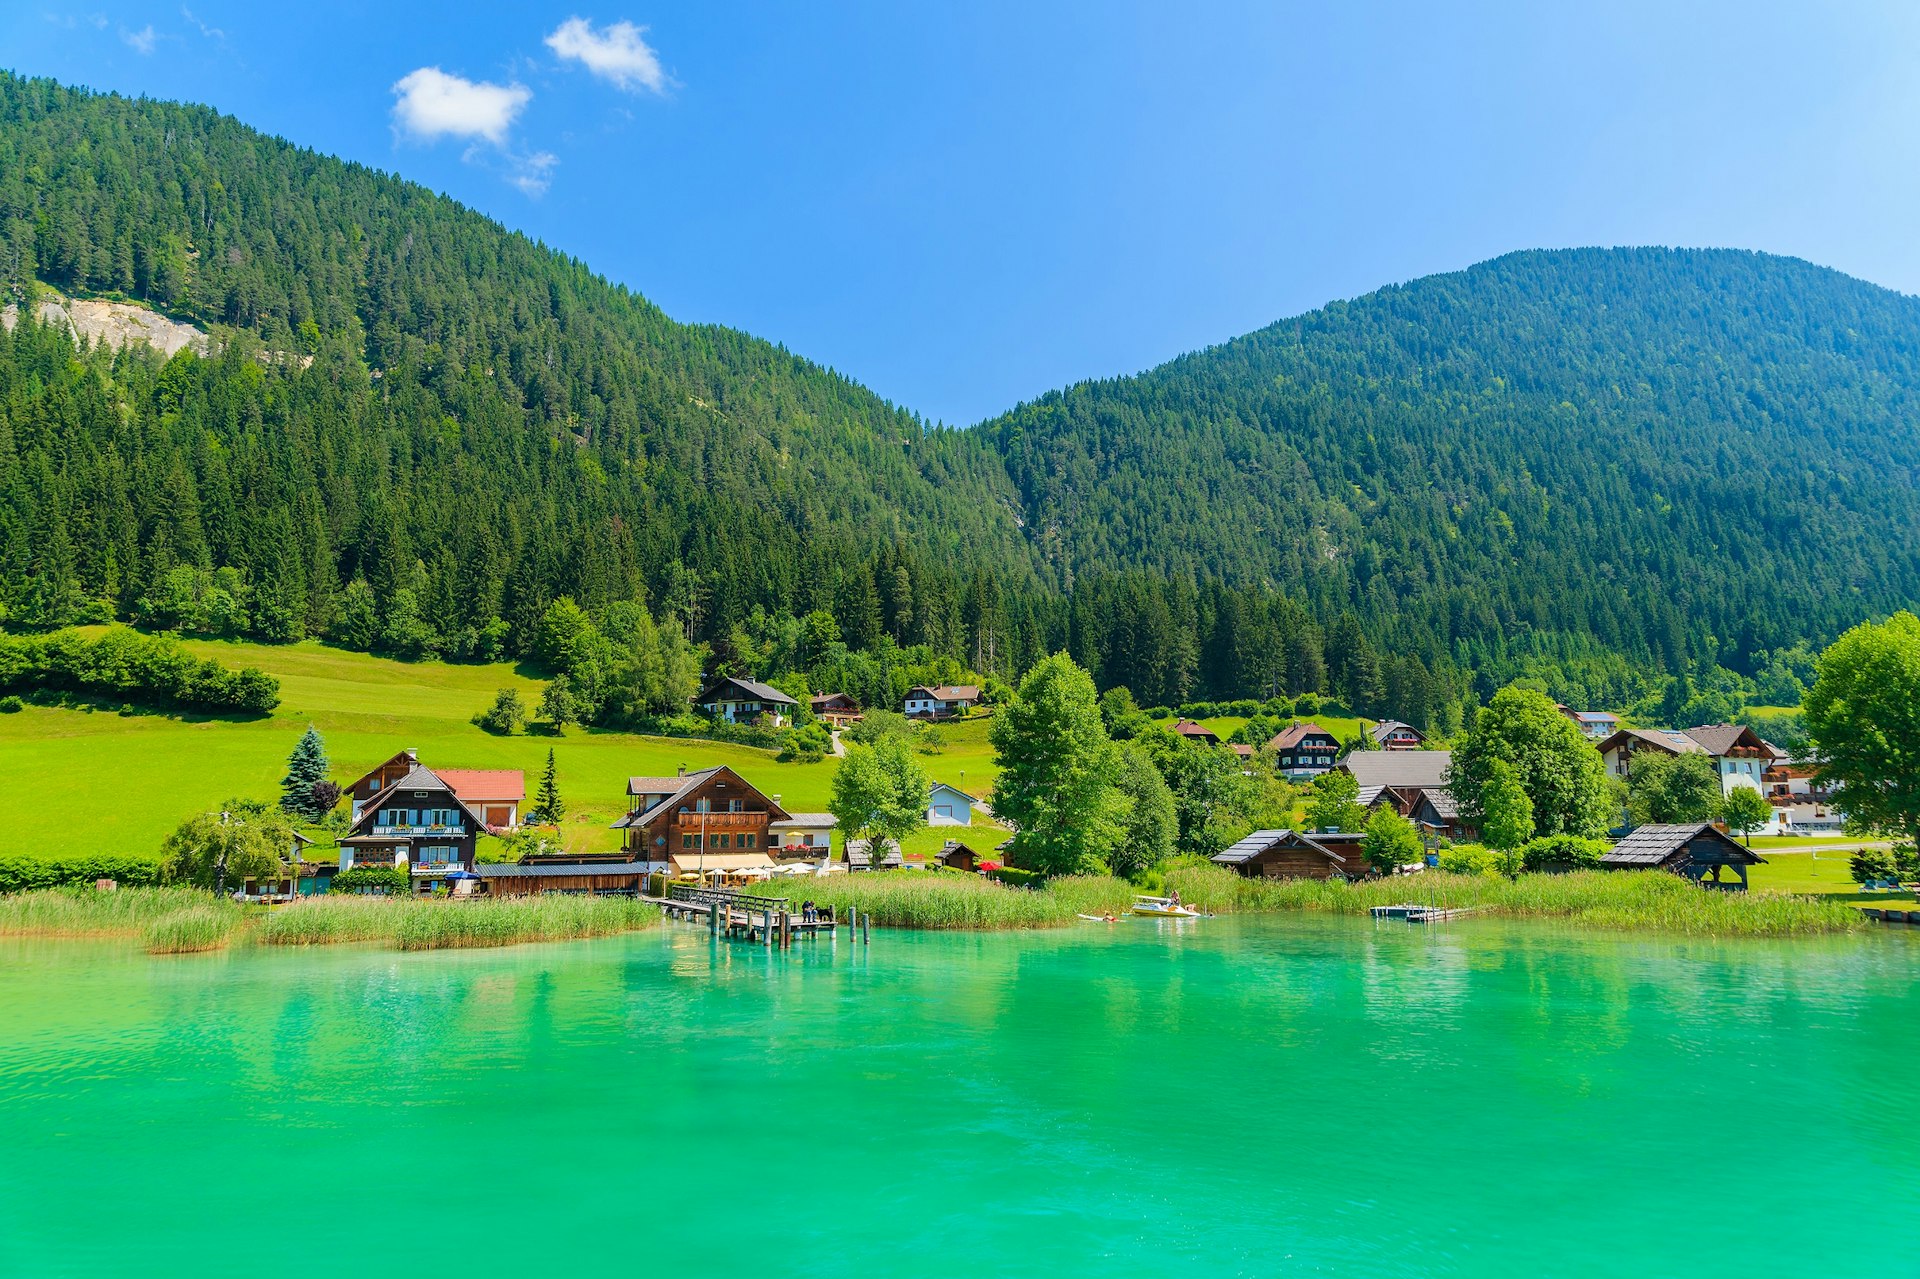 A bright green lake surrounded by hills covered in woodland. There are several chalet-style houses on the lakeside